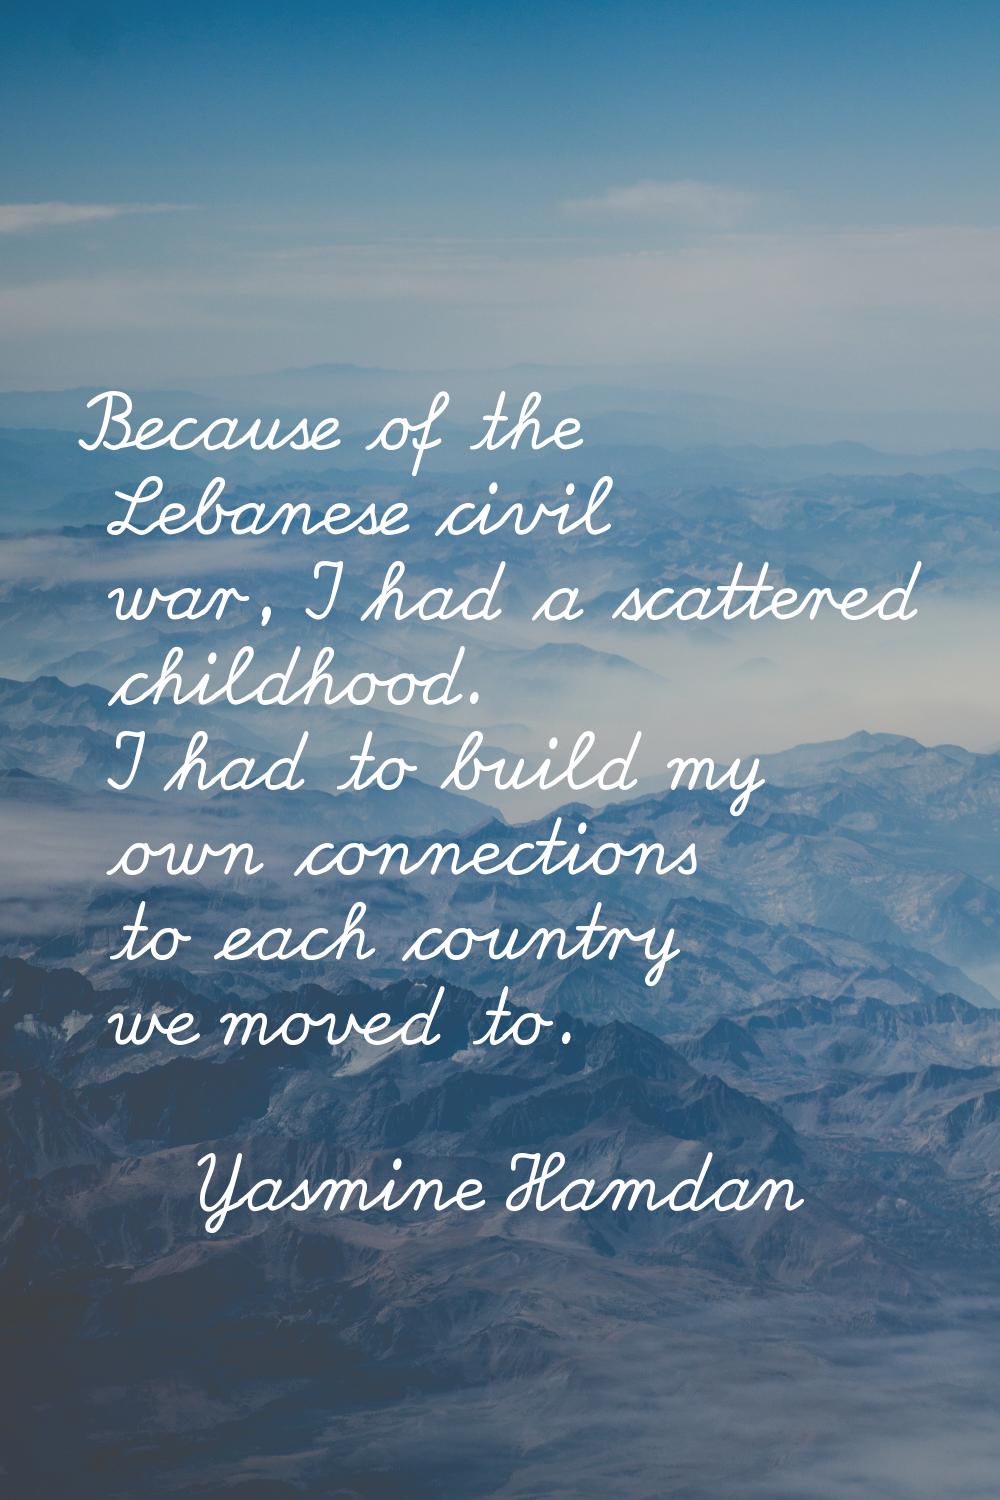 Because of the Lebanese civil war, I had a scattered childhood. I had to build my own connections t